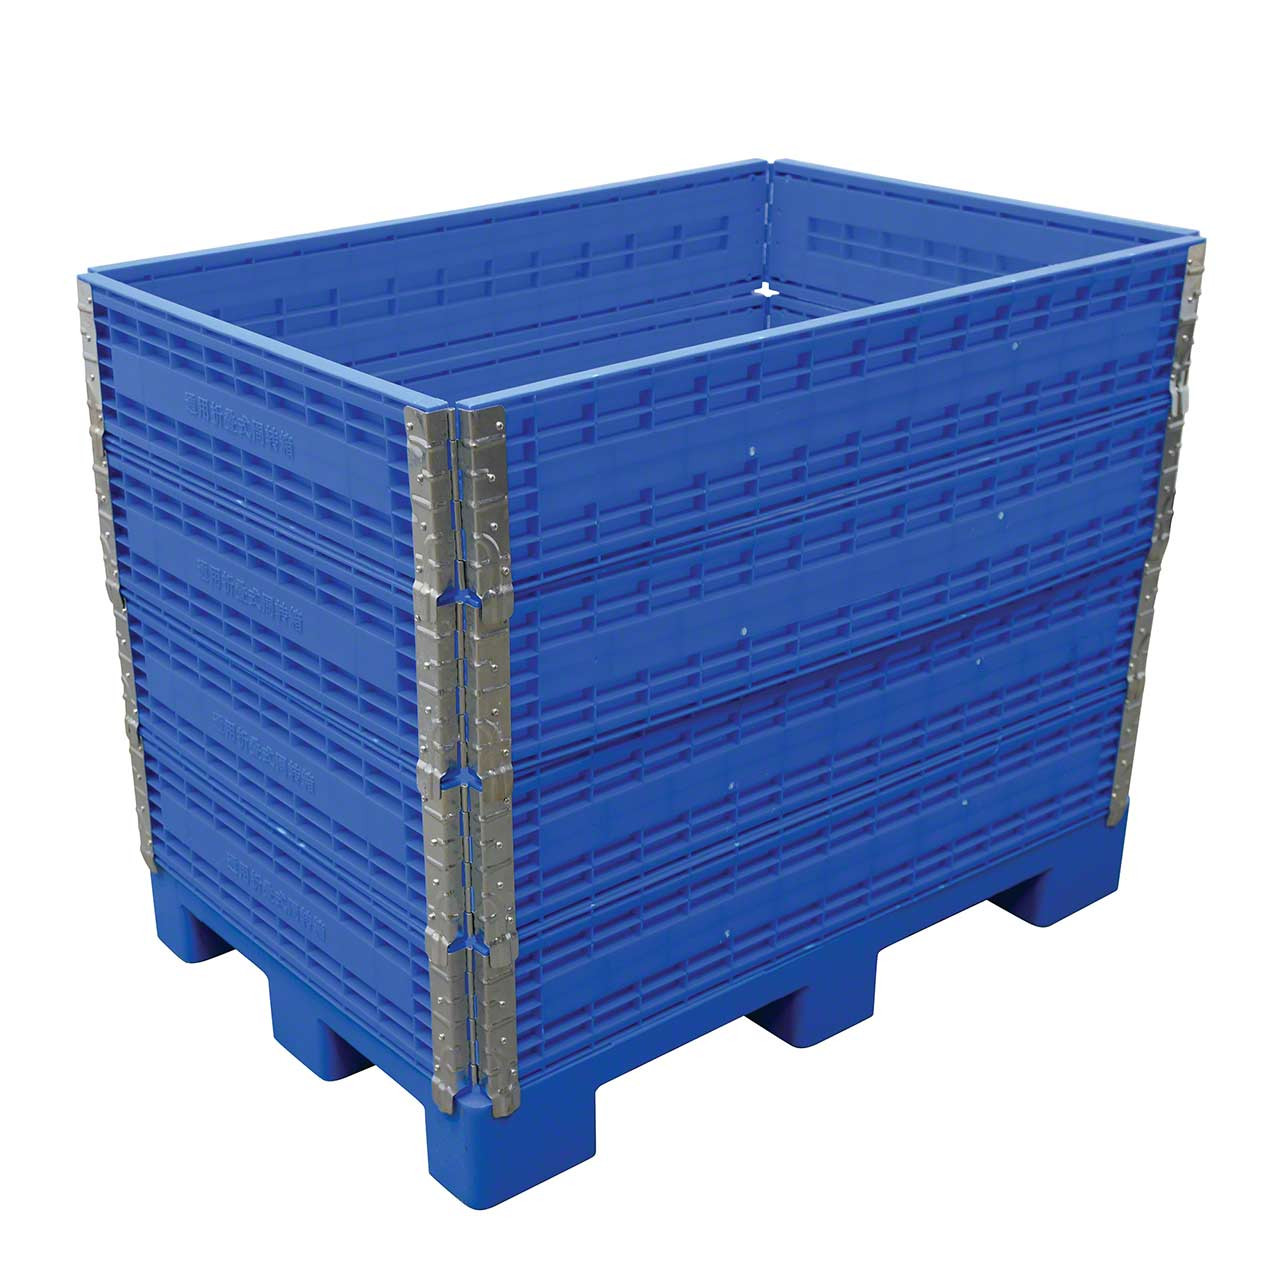 Vestil's Multi-C folding and multi height container